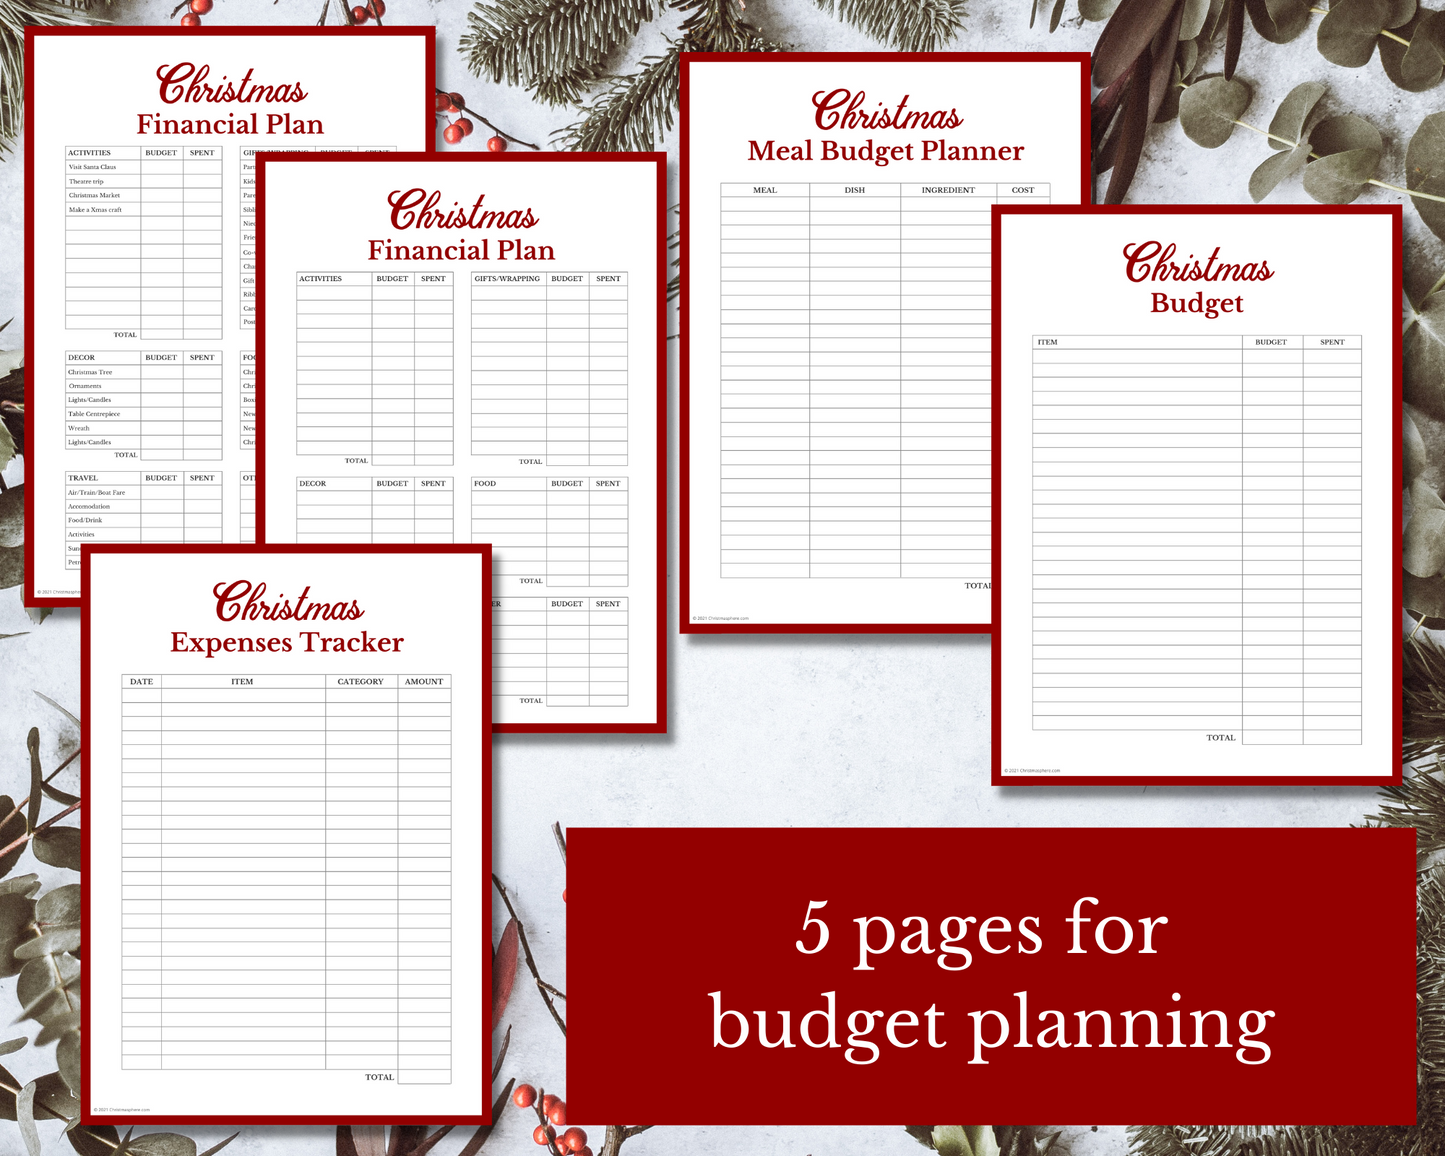 ULTIMATE Christmas Planner and Organiser | Festive Organization | Over 100 Pages!